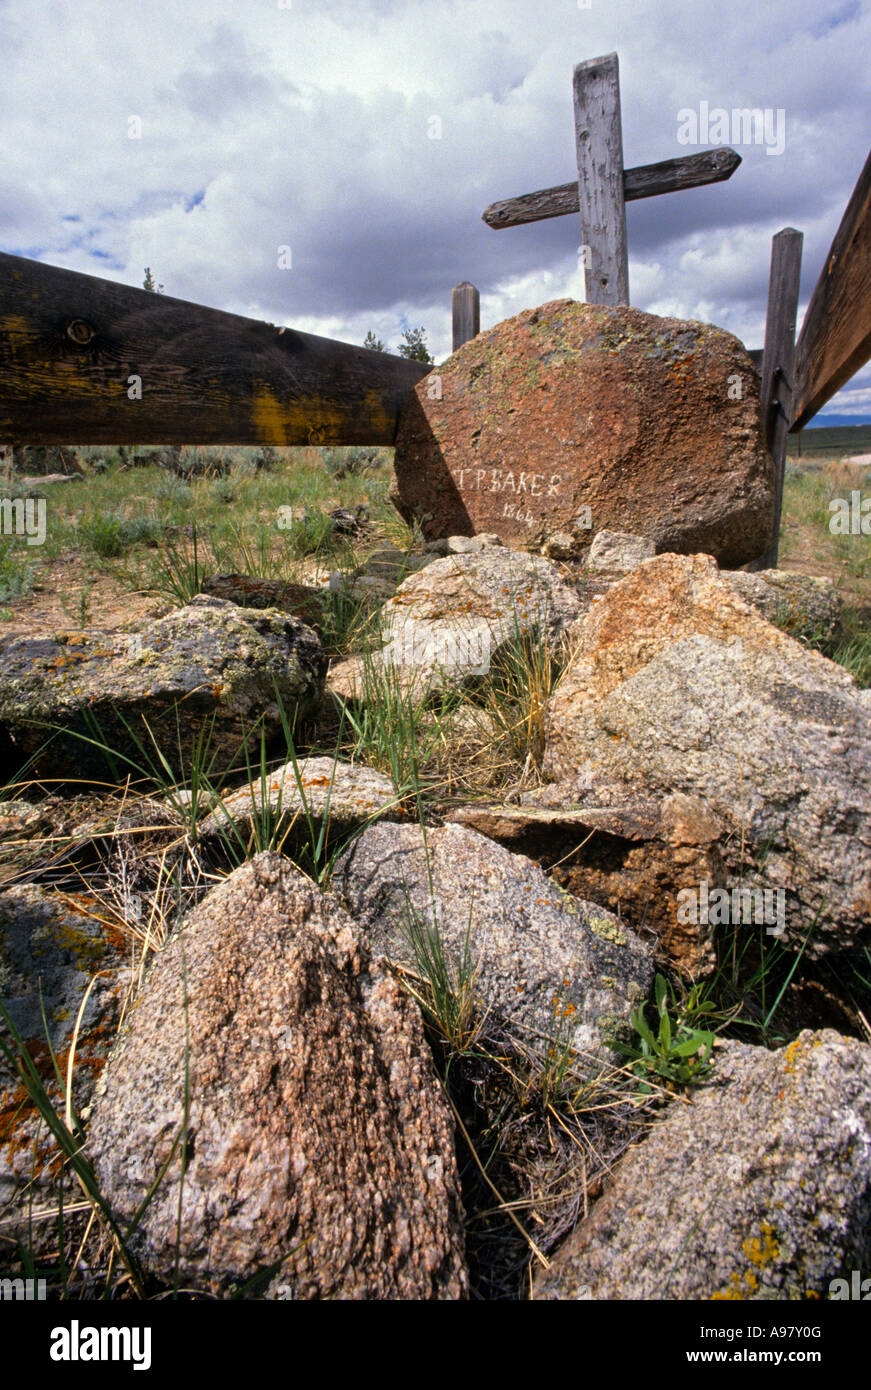 GRAVE IS PRESERVED ALONG THE OREGON TRAIL NEAR SUN RANCH, WYOMING. Stock Photo